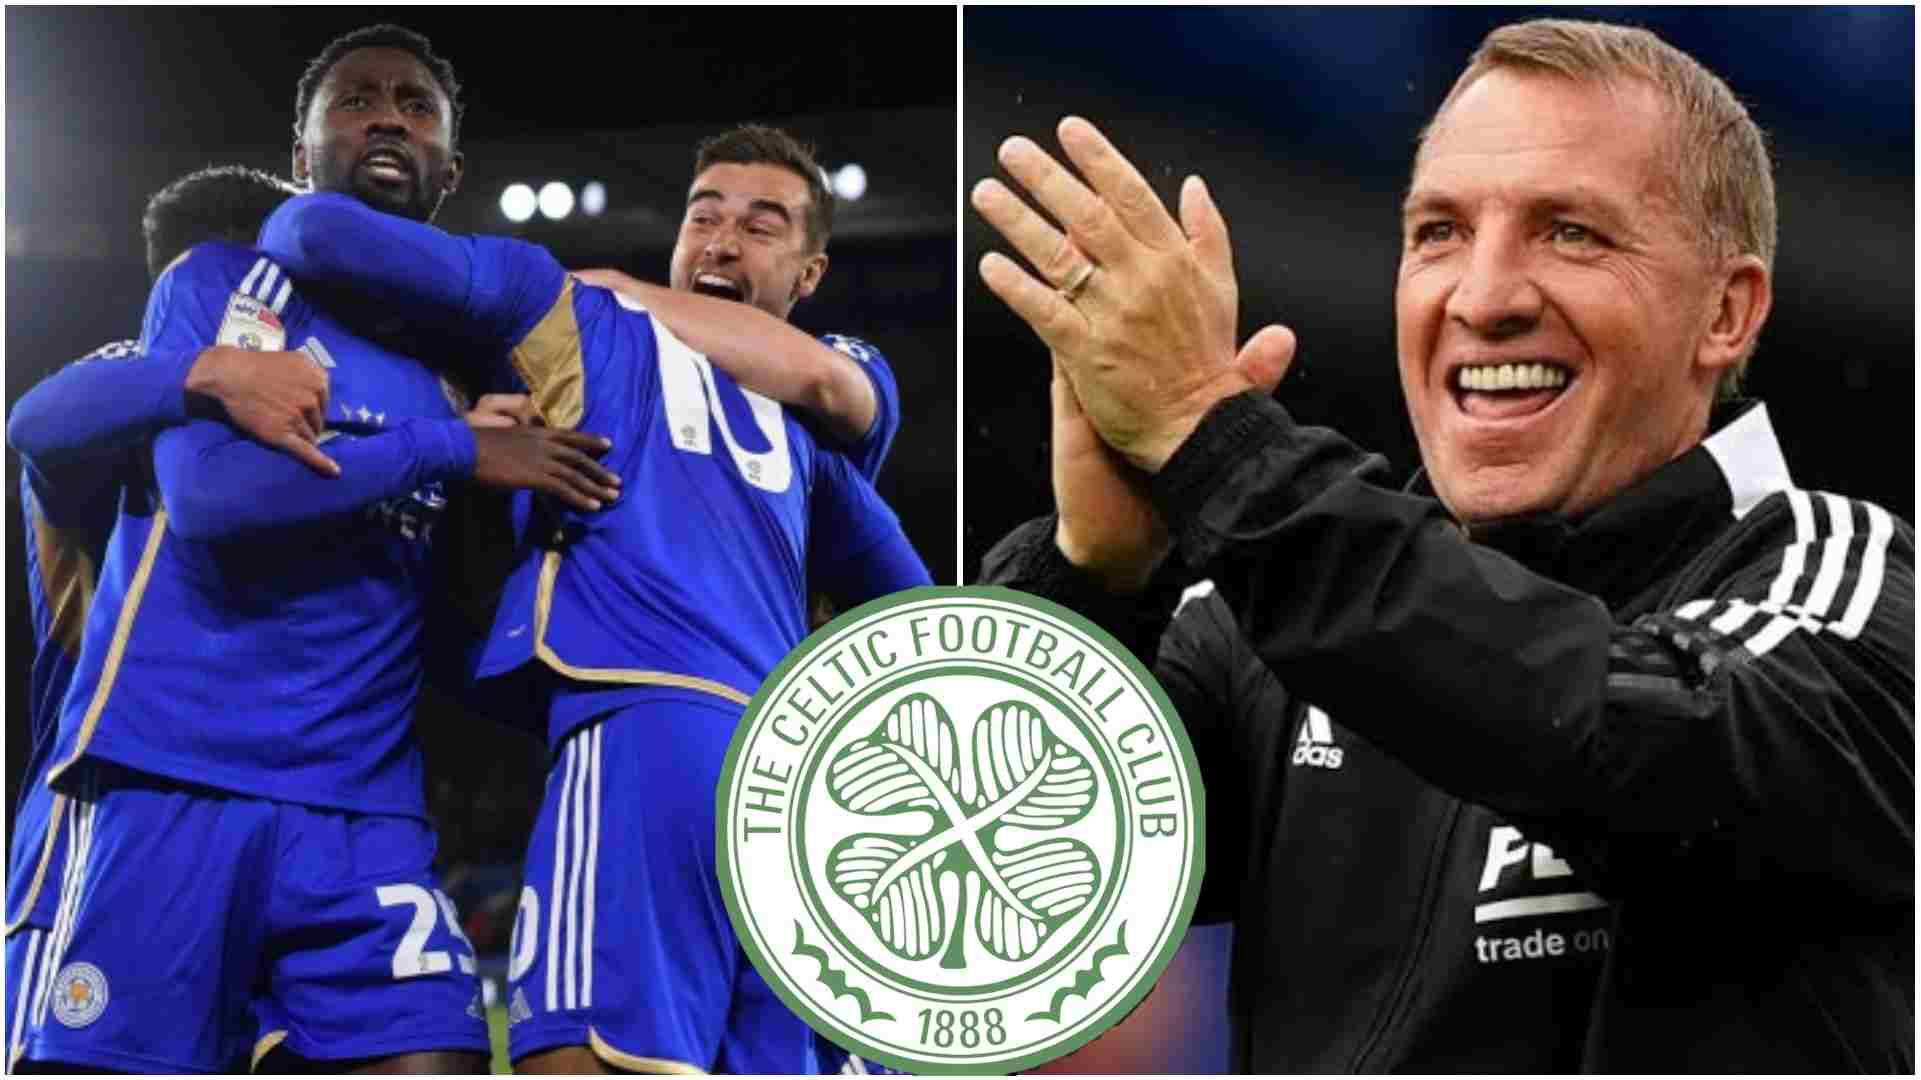 ‘He’s coming to Celtic to reunite with Brendan Rodgers?’ Leicester City world-class midfielder has now told Celtic he would LOVE to join the club this summer as a free agent after leaving the King Power Stadium